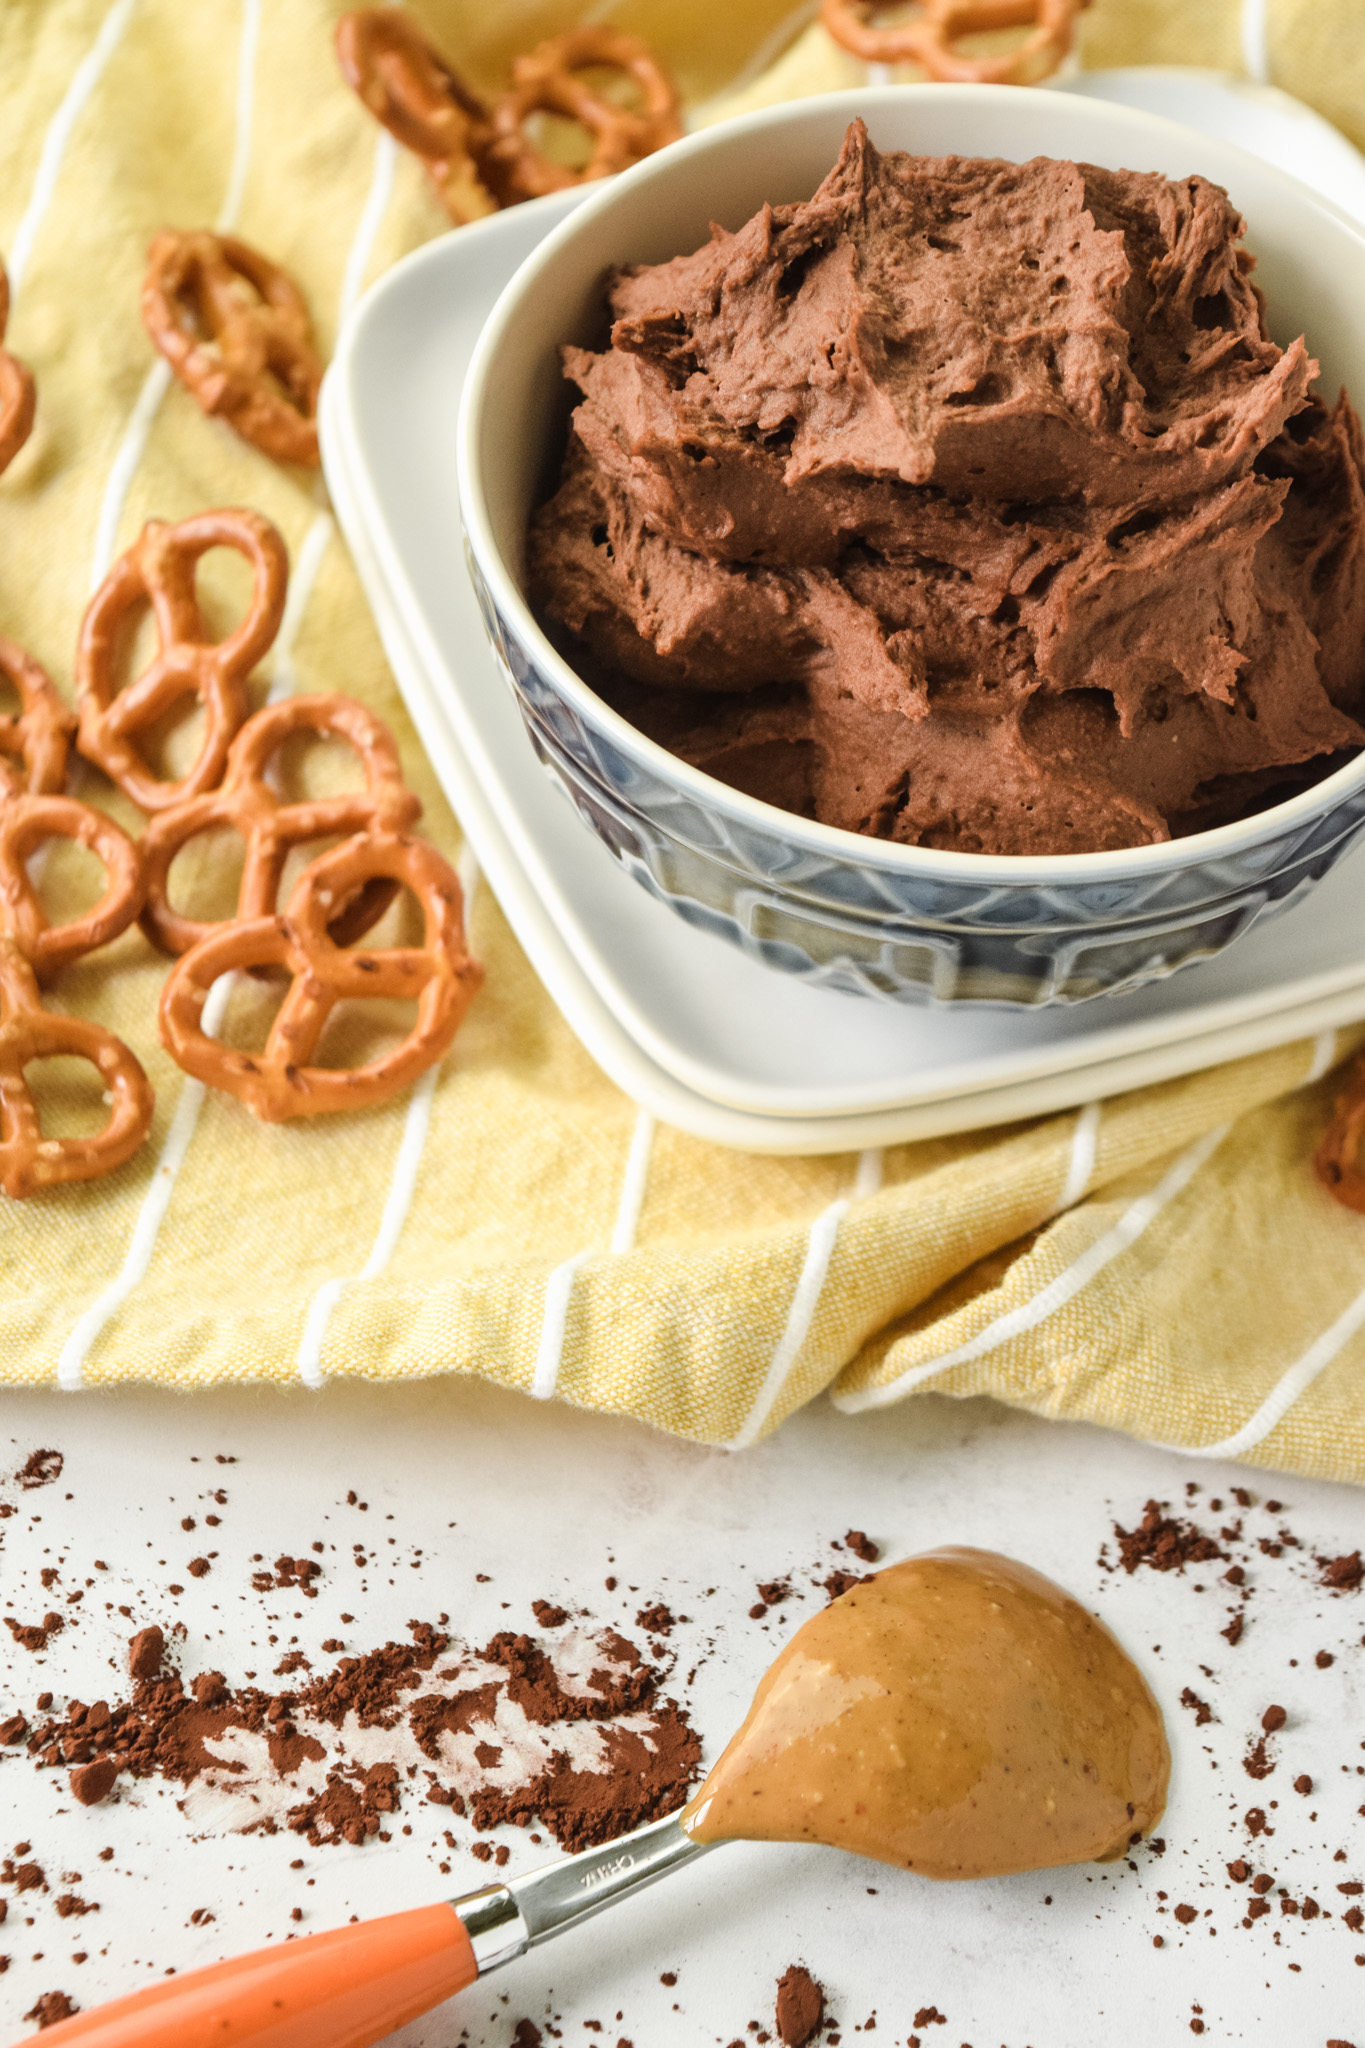 Sweet Chocolate Hummus with Peanut Butter